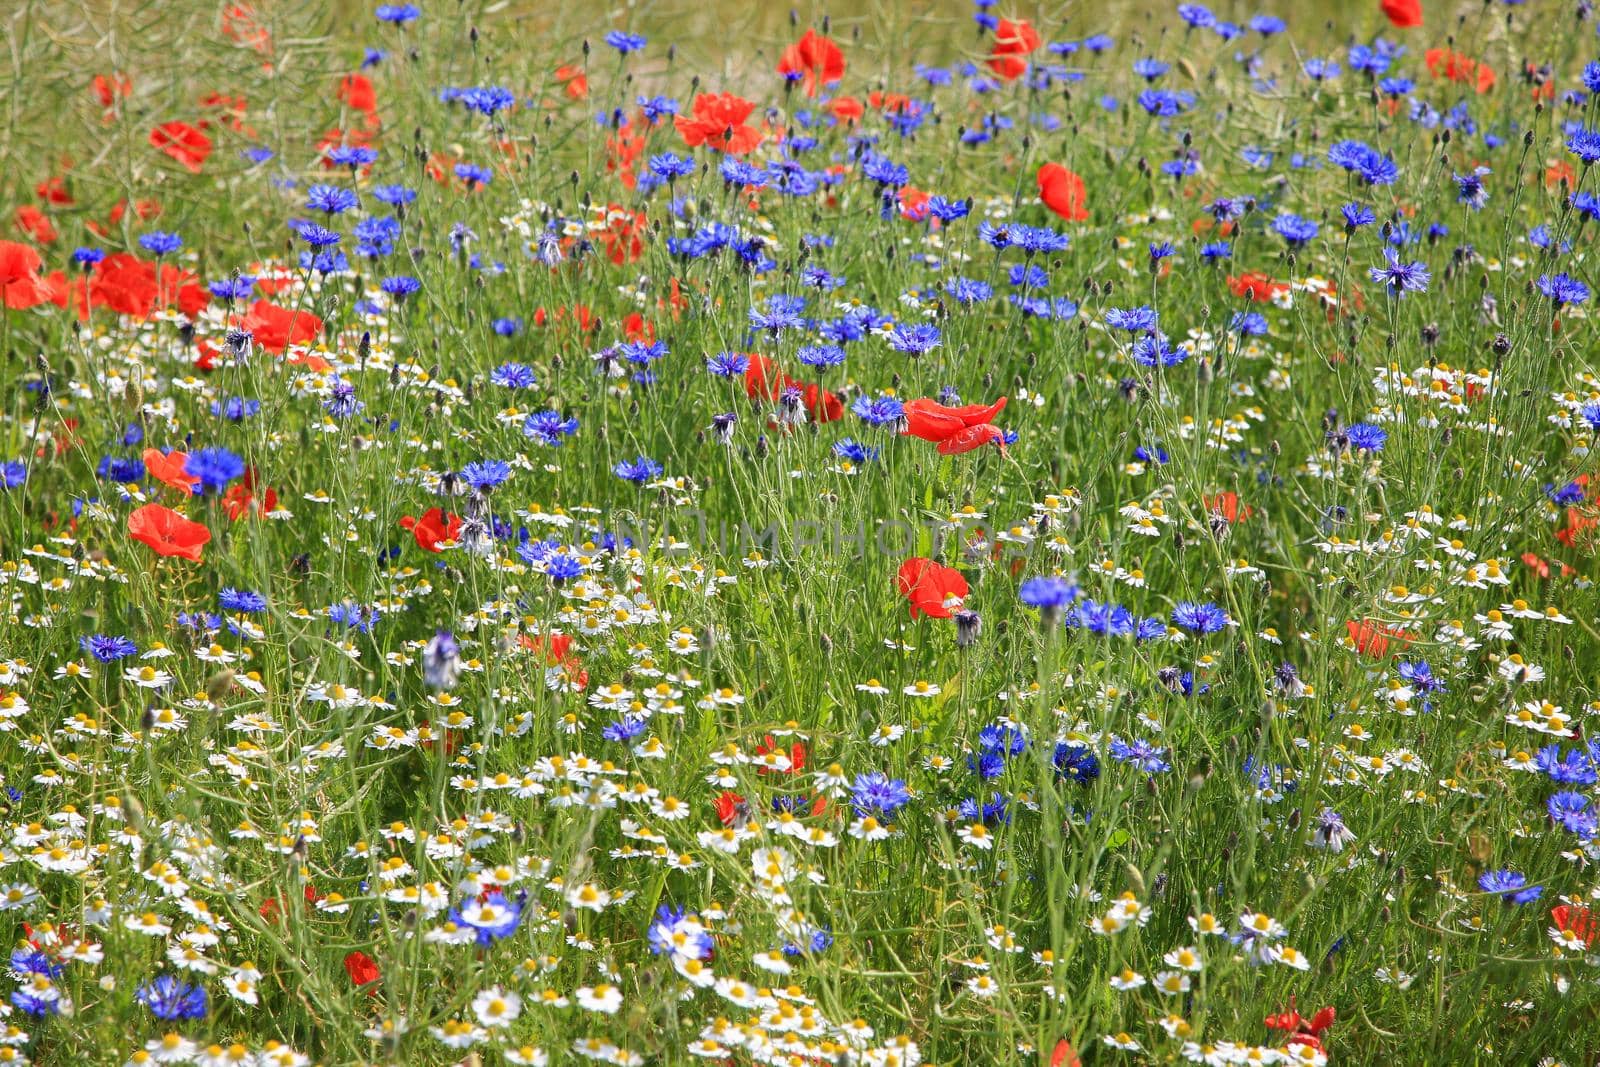 Wildflower meadow with poppies, cornflowers and daisies by Kasparart